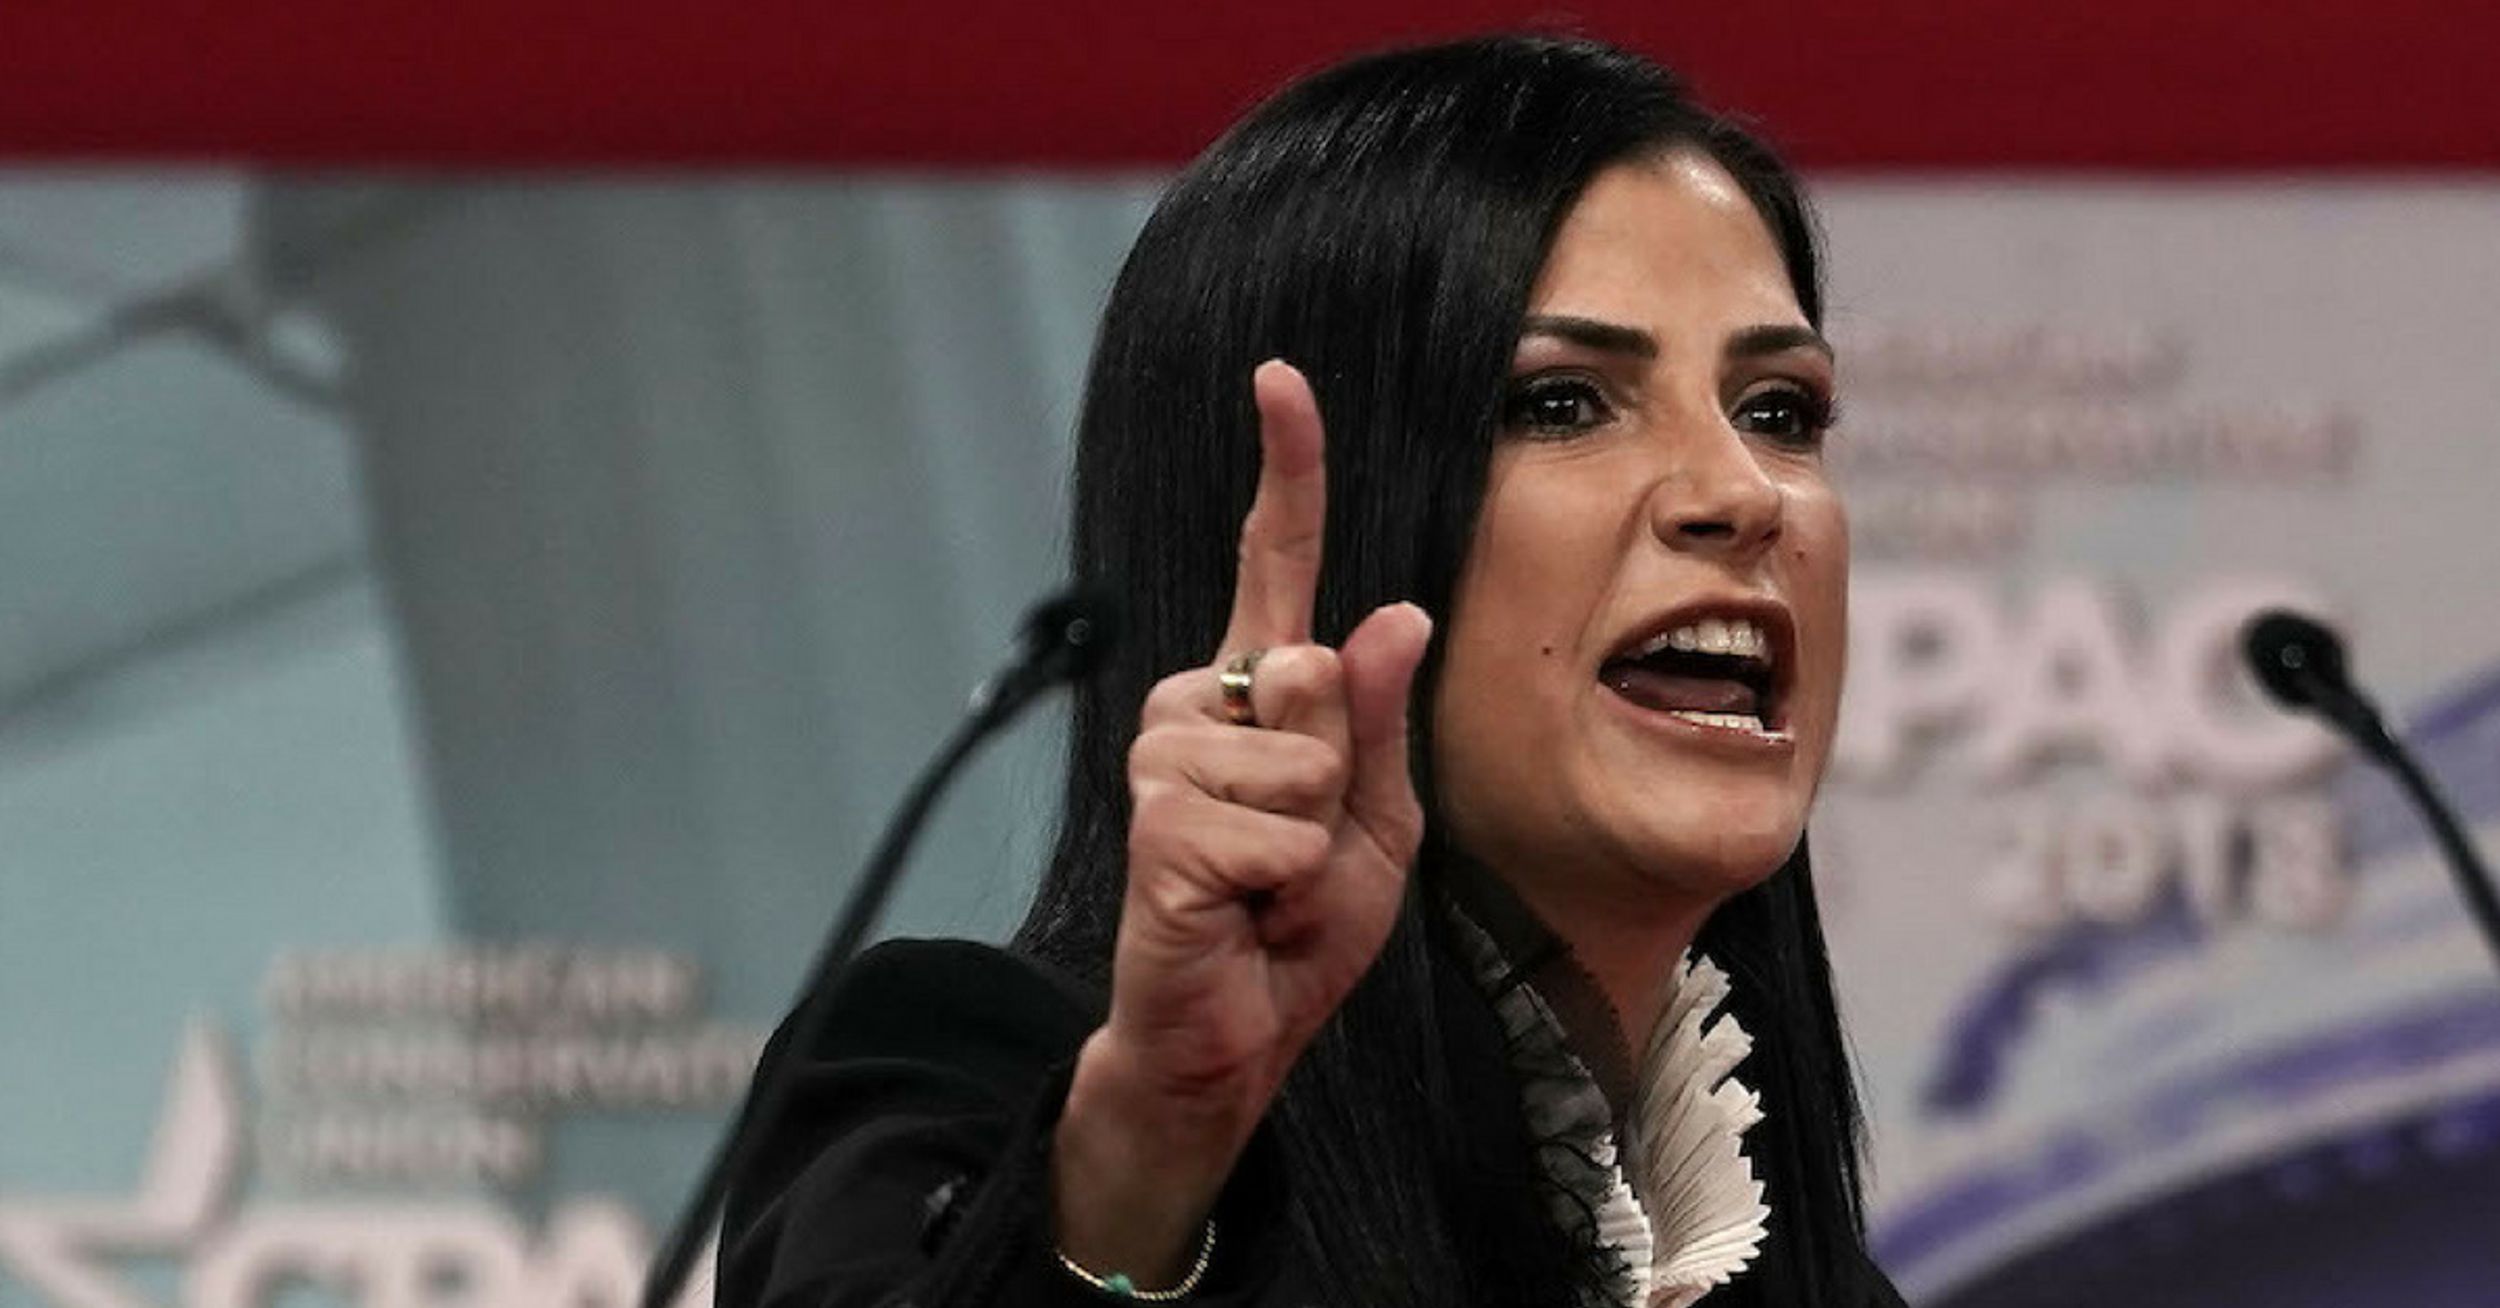 Did NRA Spokeswoman Dana Loesch Seriously Just Compare 3D Printing Untraceable Guns To Knitting?!